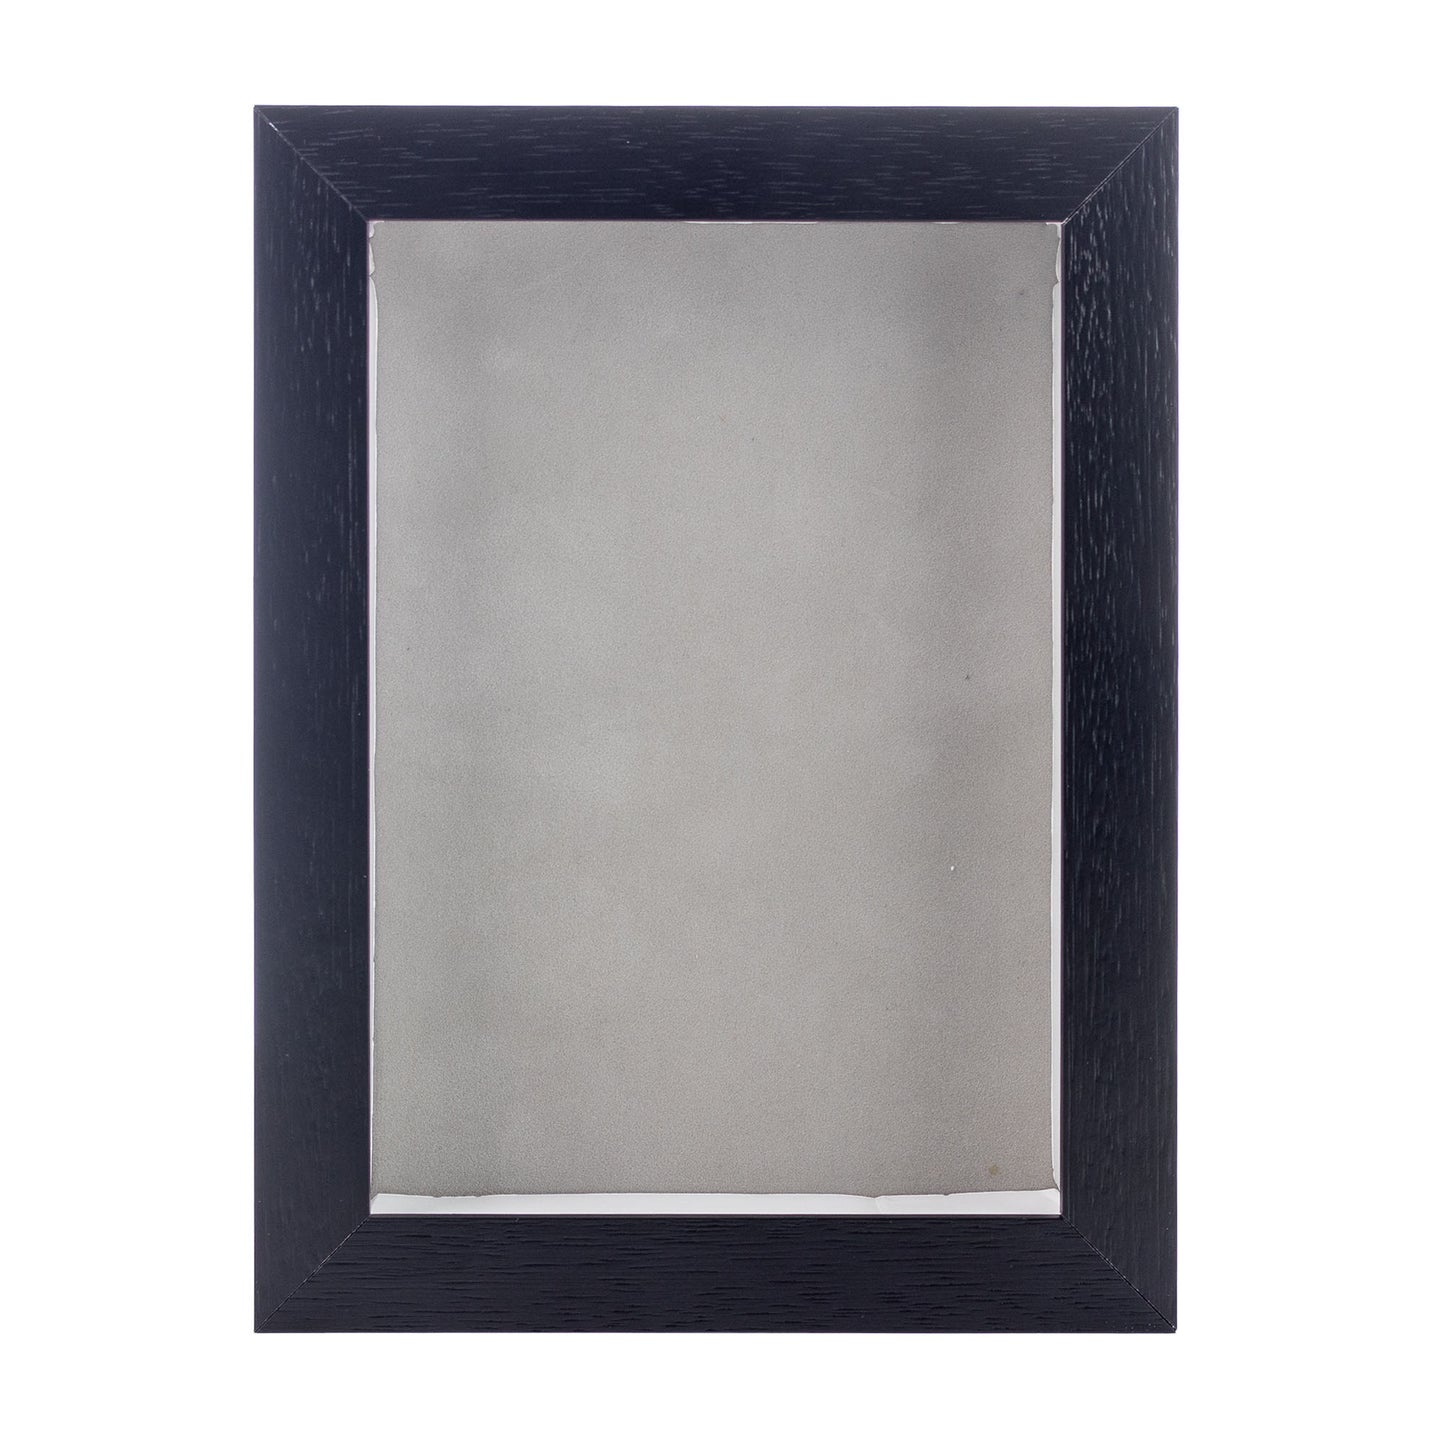 Textured Black Shadow Box Frame With Light Grey Acid-Free Suede Backing